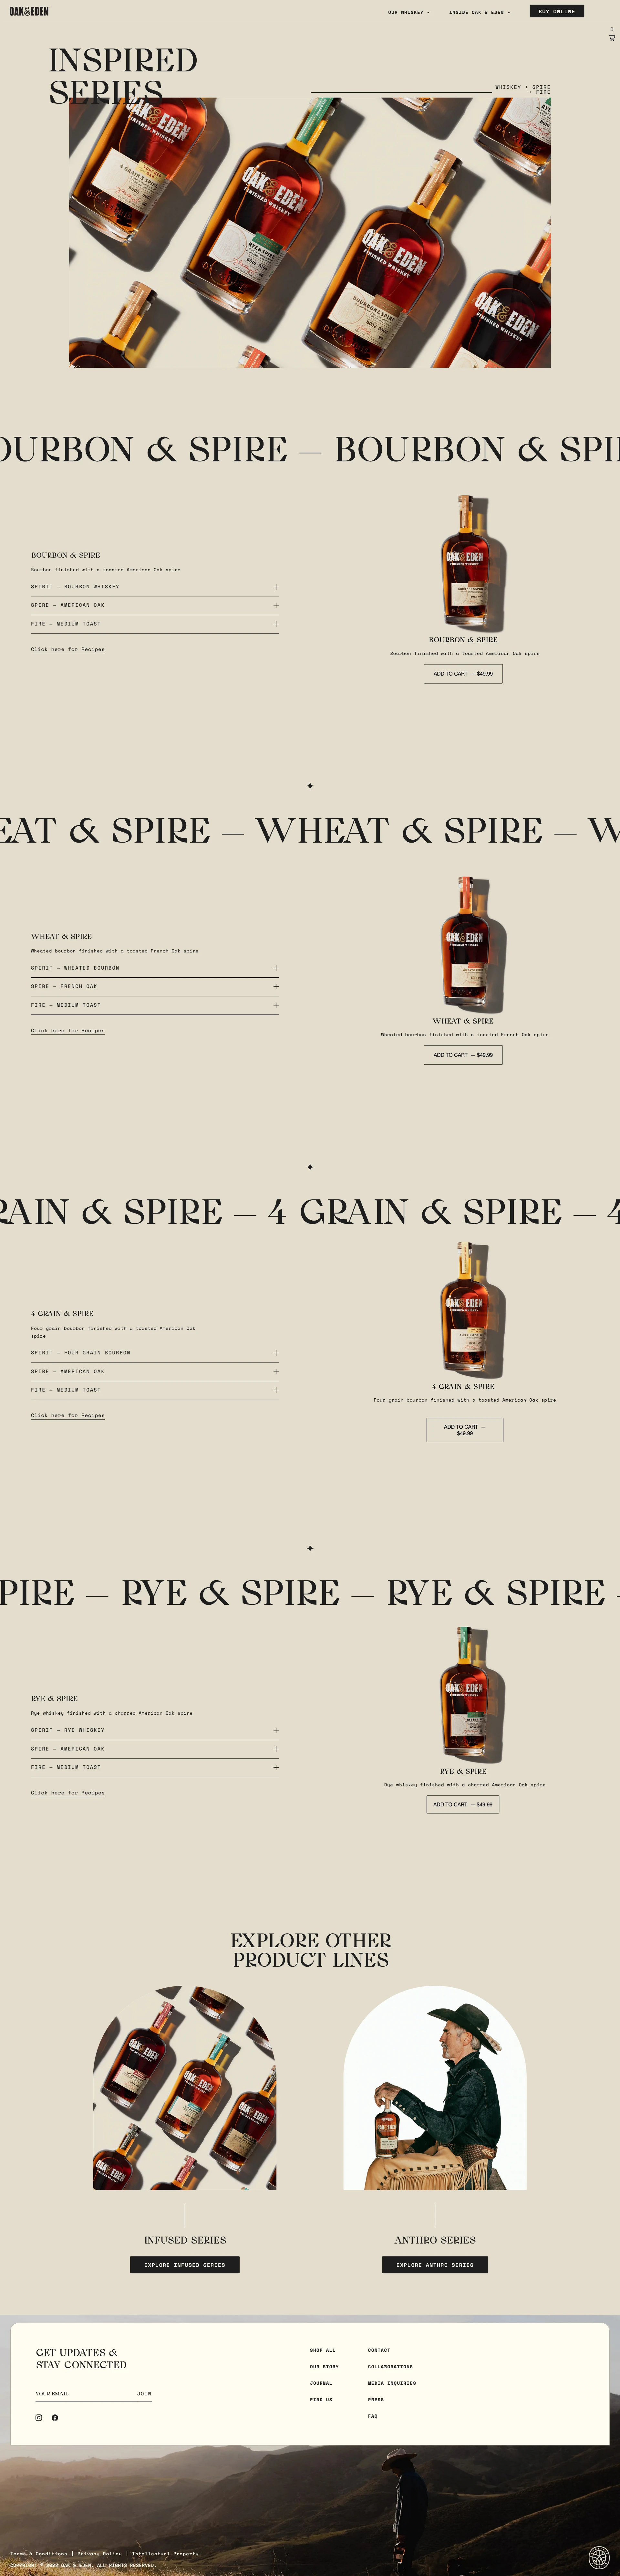 Oak & Eden Landing Page Example: Oak & Eden was birthed out of an ideal for innovation. We believe authority is released when a creator creates, and we believe everyone carries the spirit of creation in them. In that spirit, we pioneered a precious technique that would become the lifeblood of Oak & Eden; in-bottle finishing.